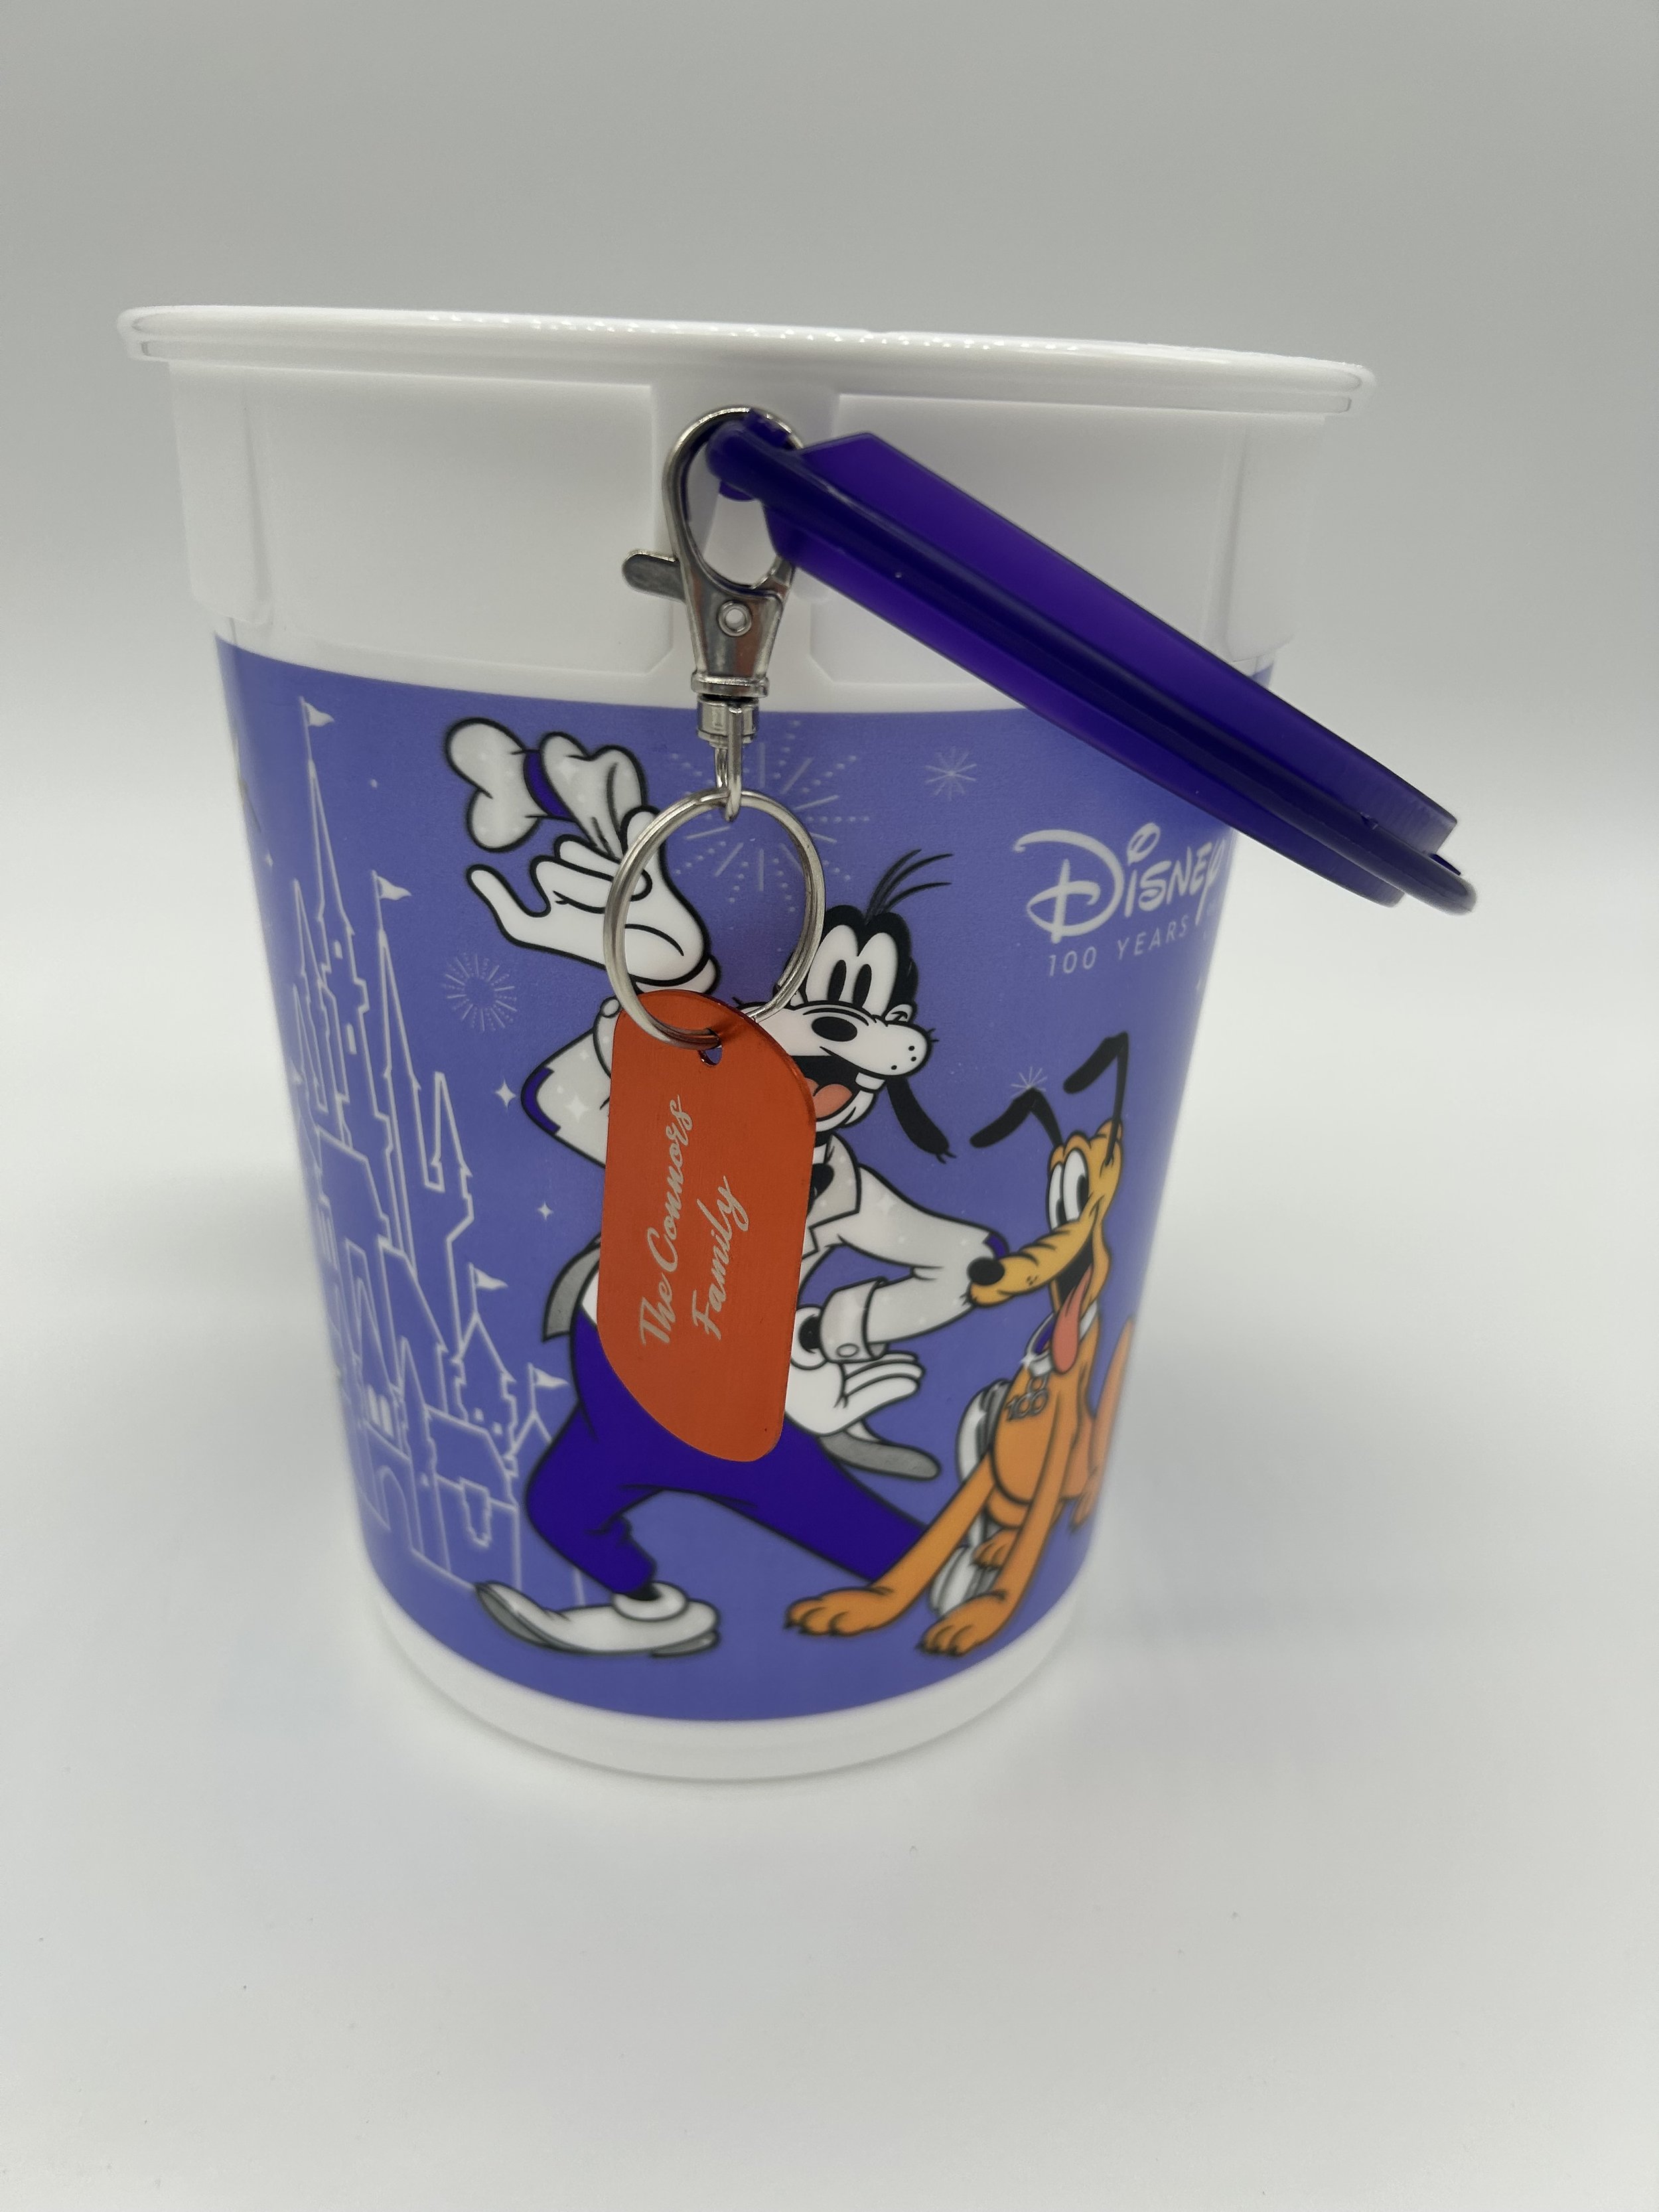 Add Some Personalized Fun to Your Popcorn Bucket